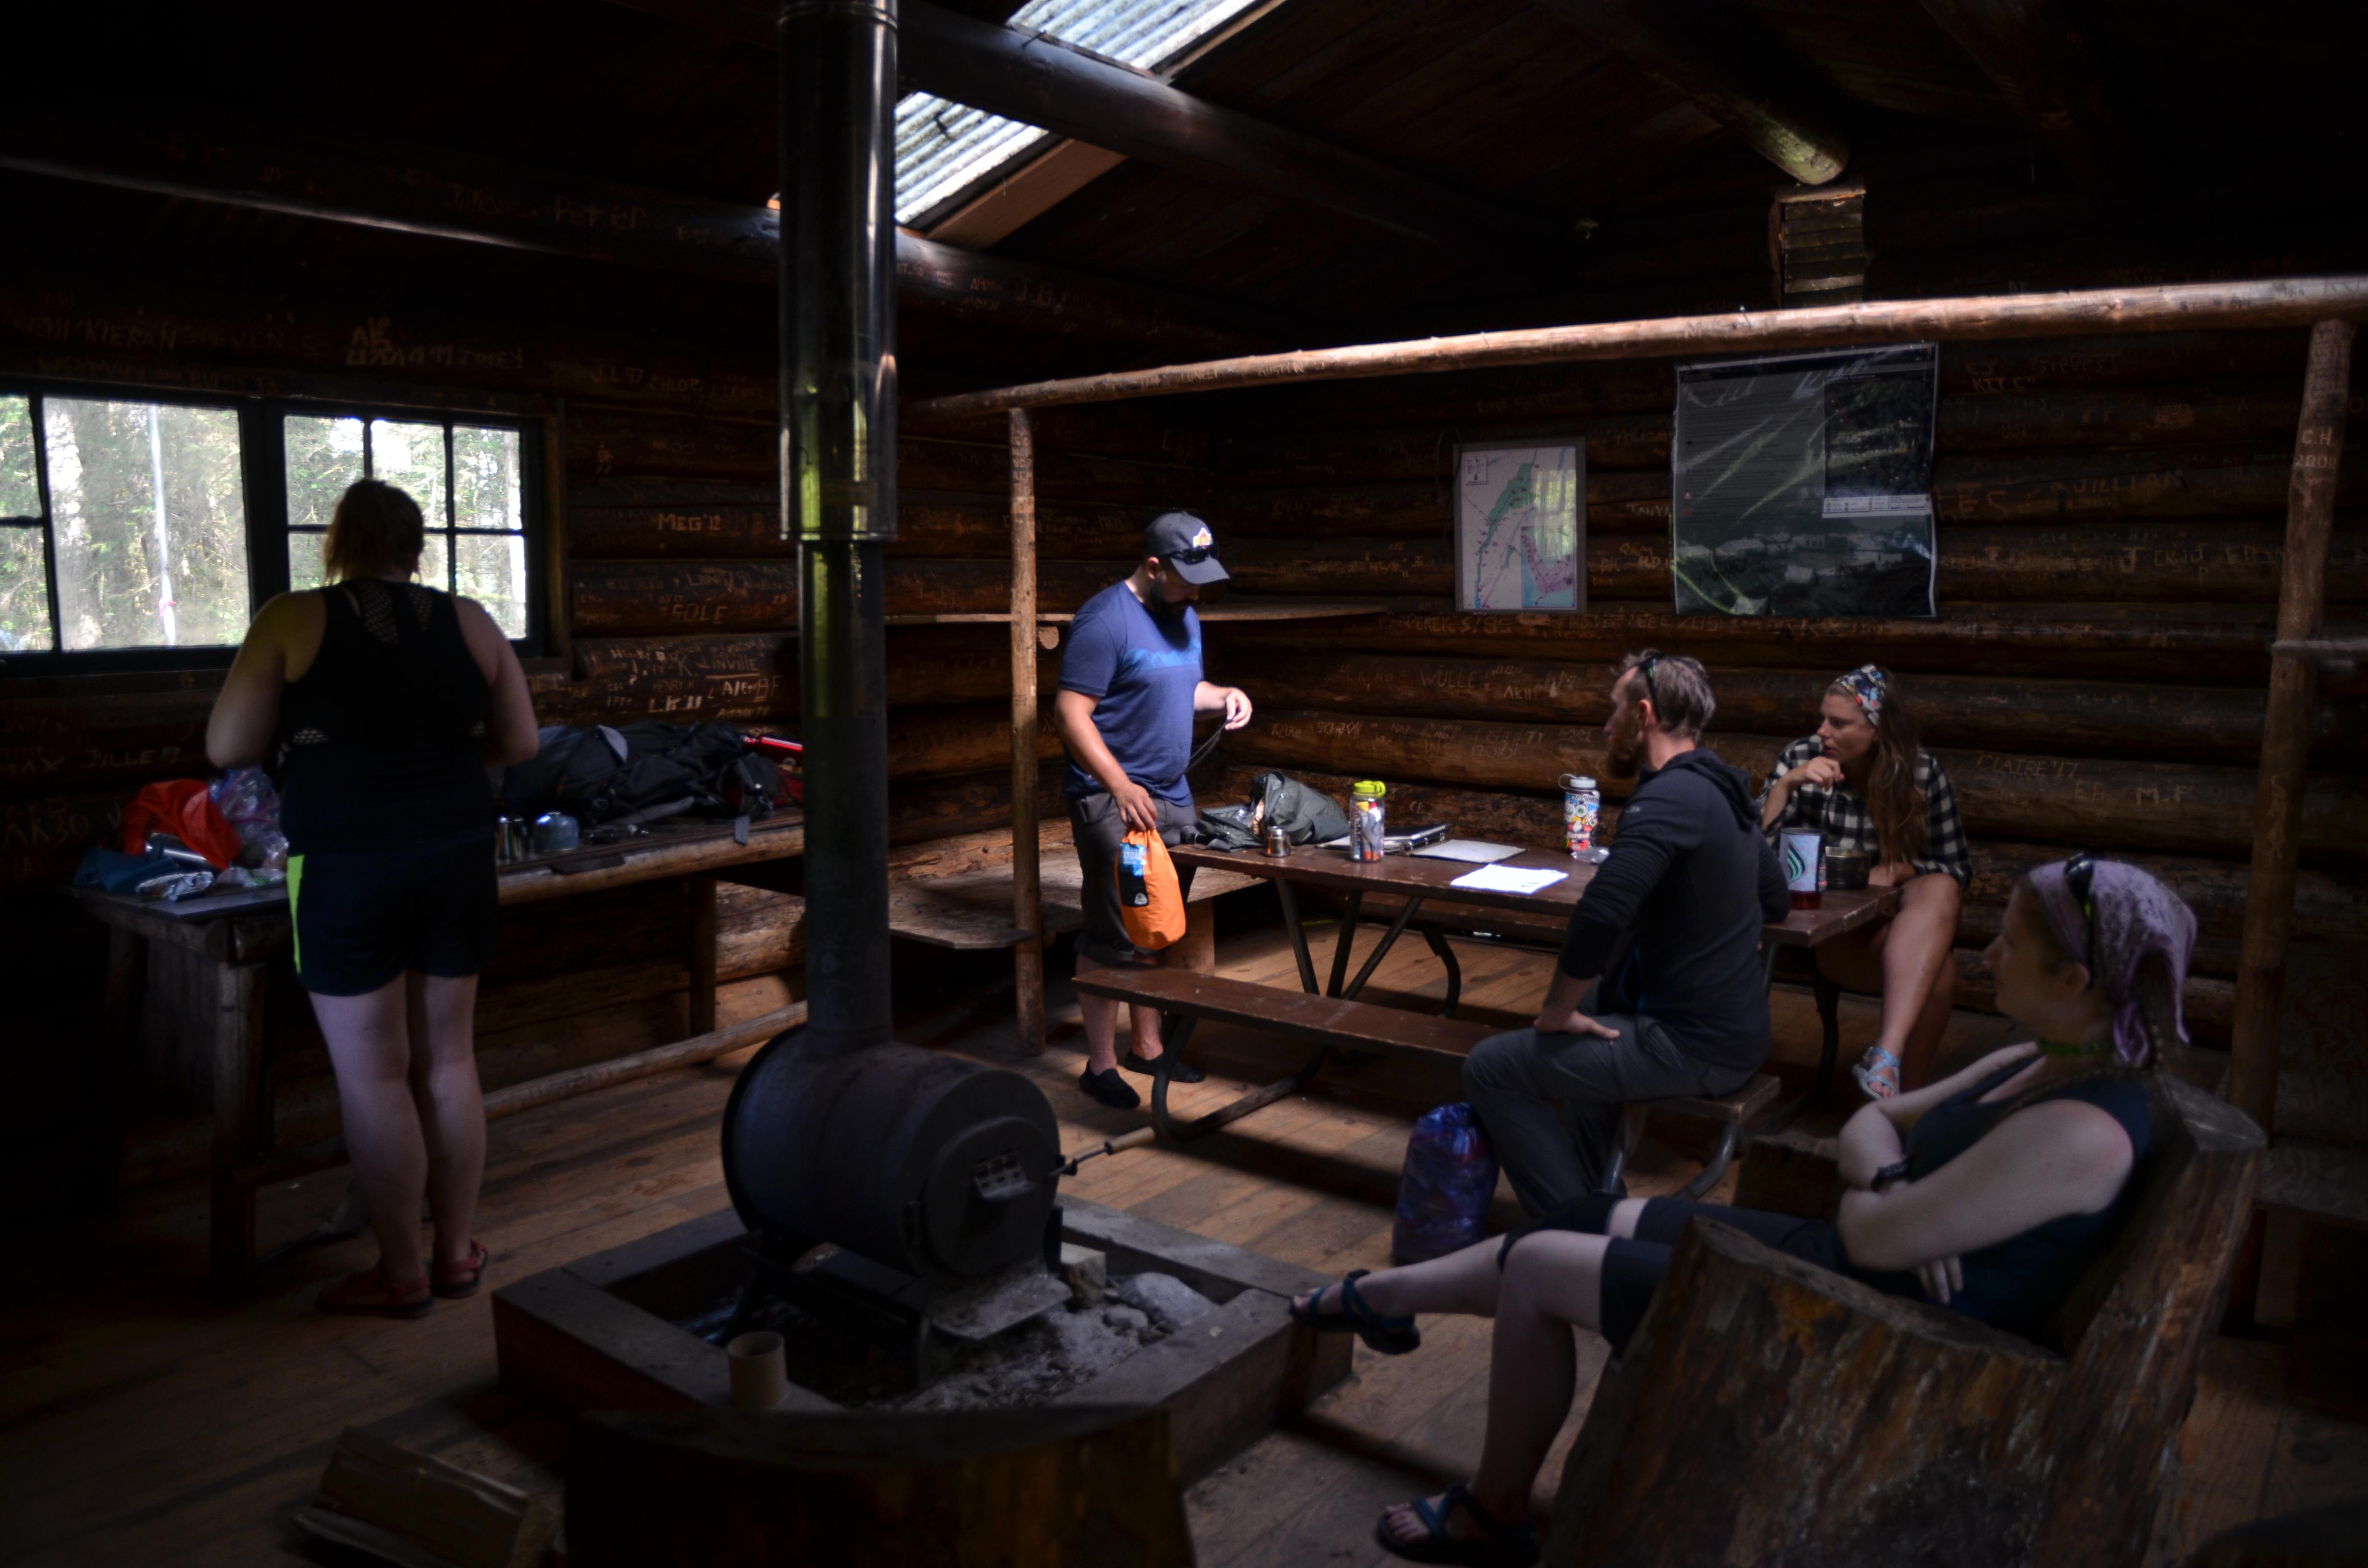 Inside of a log cabin with people gathered around a wood stove.